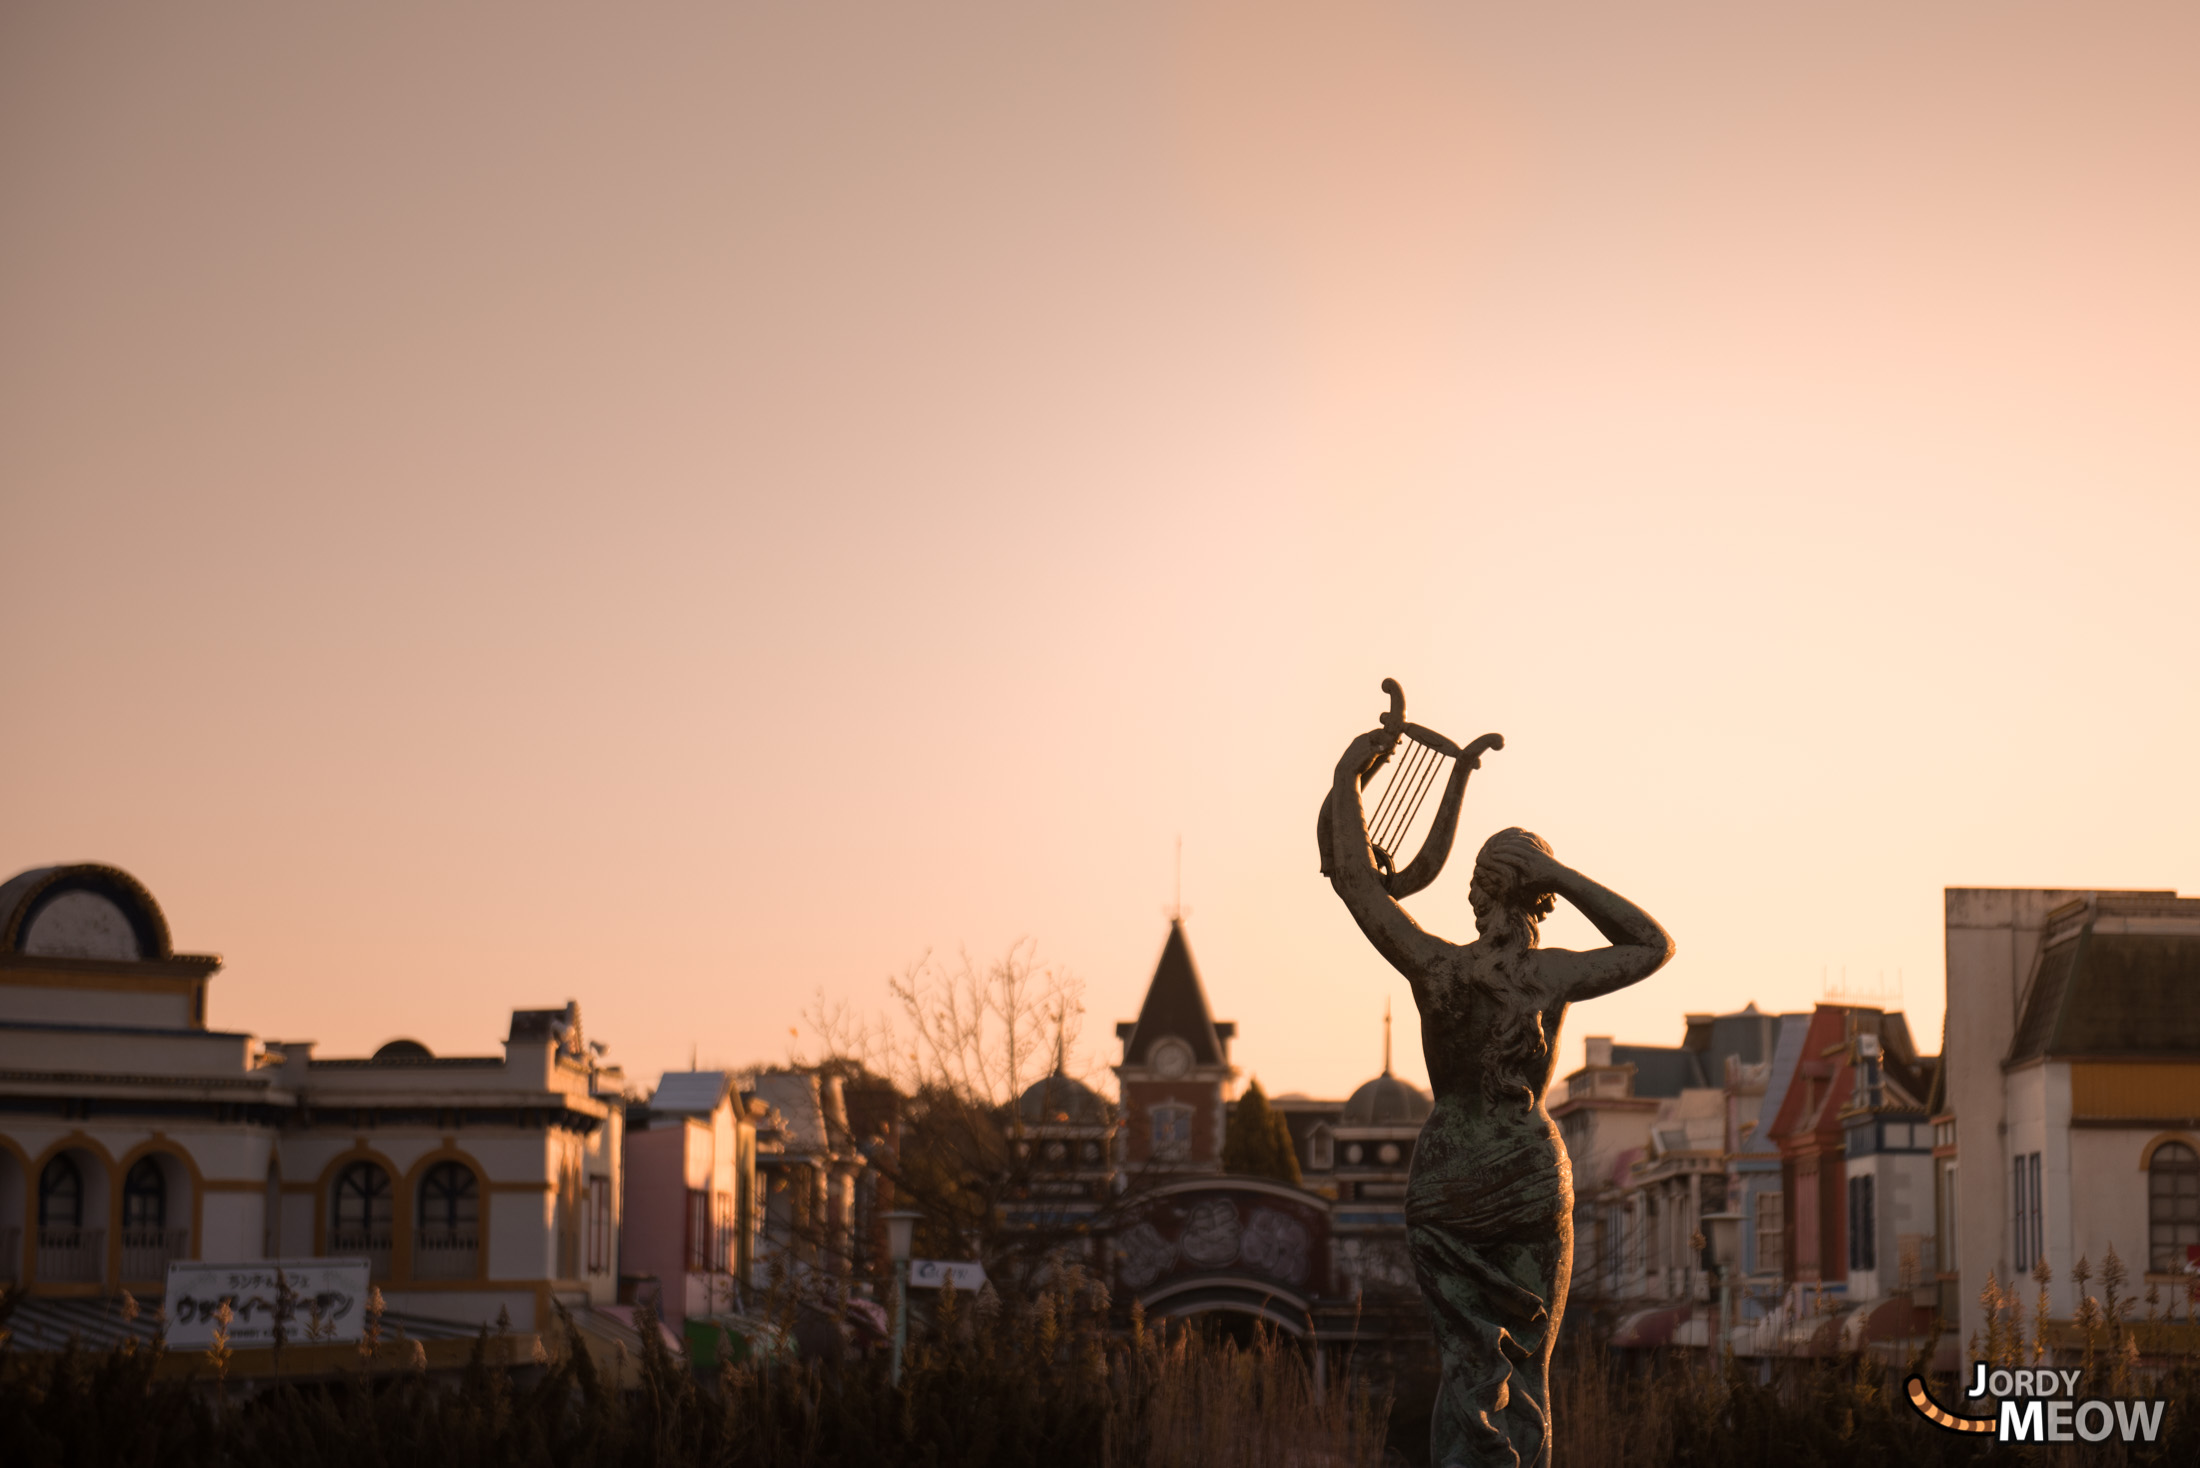 Eerie ruins of Nara Dreamland at sunset, a haunting reminder of impermanence.